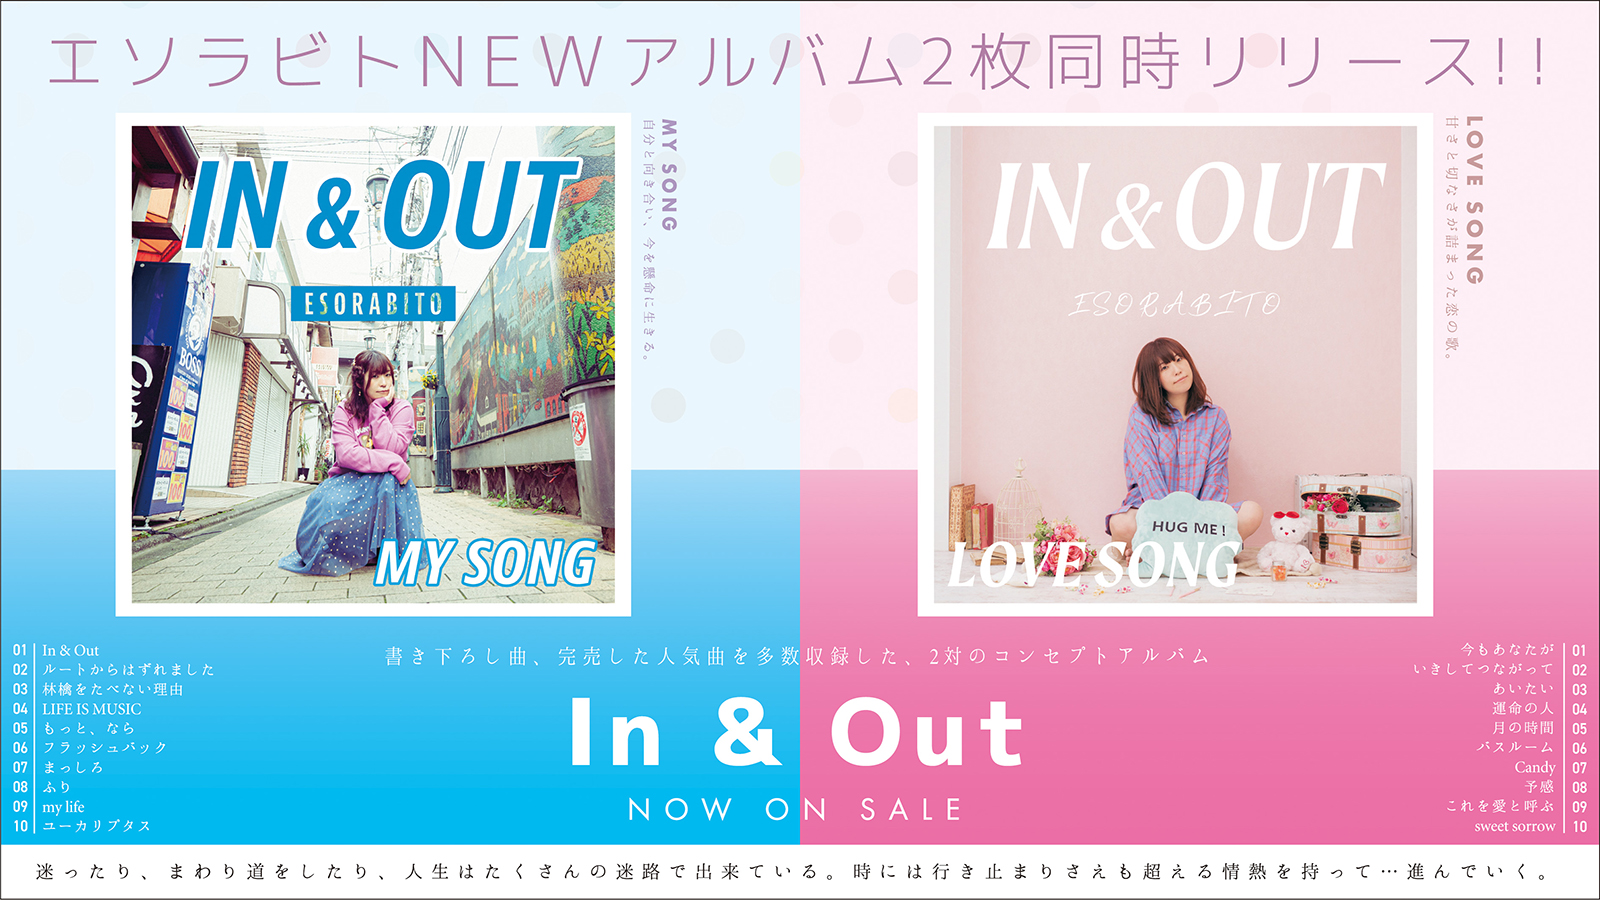 NEWアルバム2枚同時リリース！『In & Out』好評発売中！